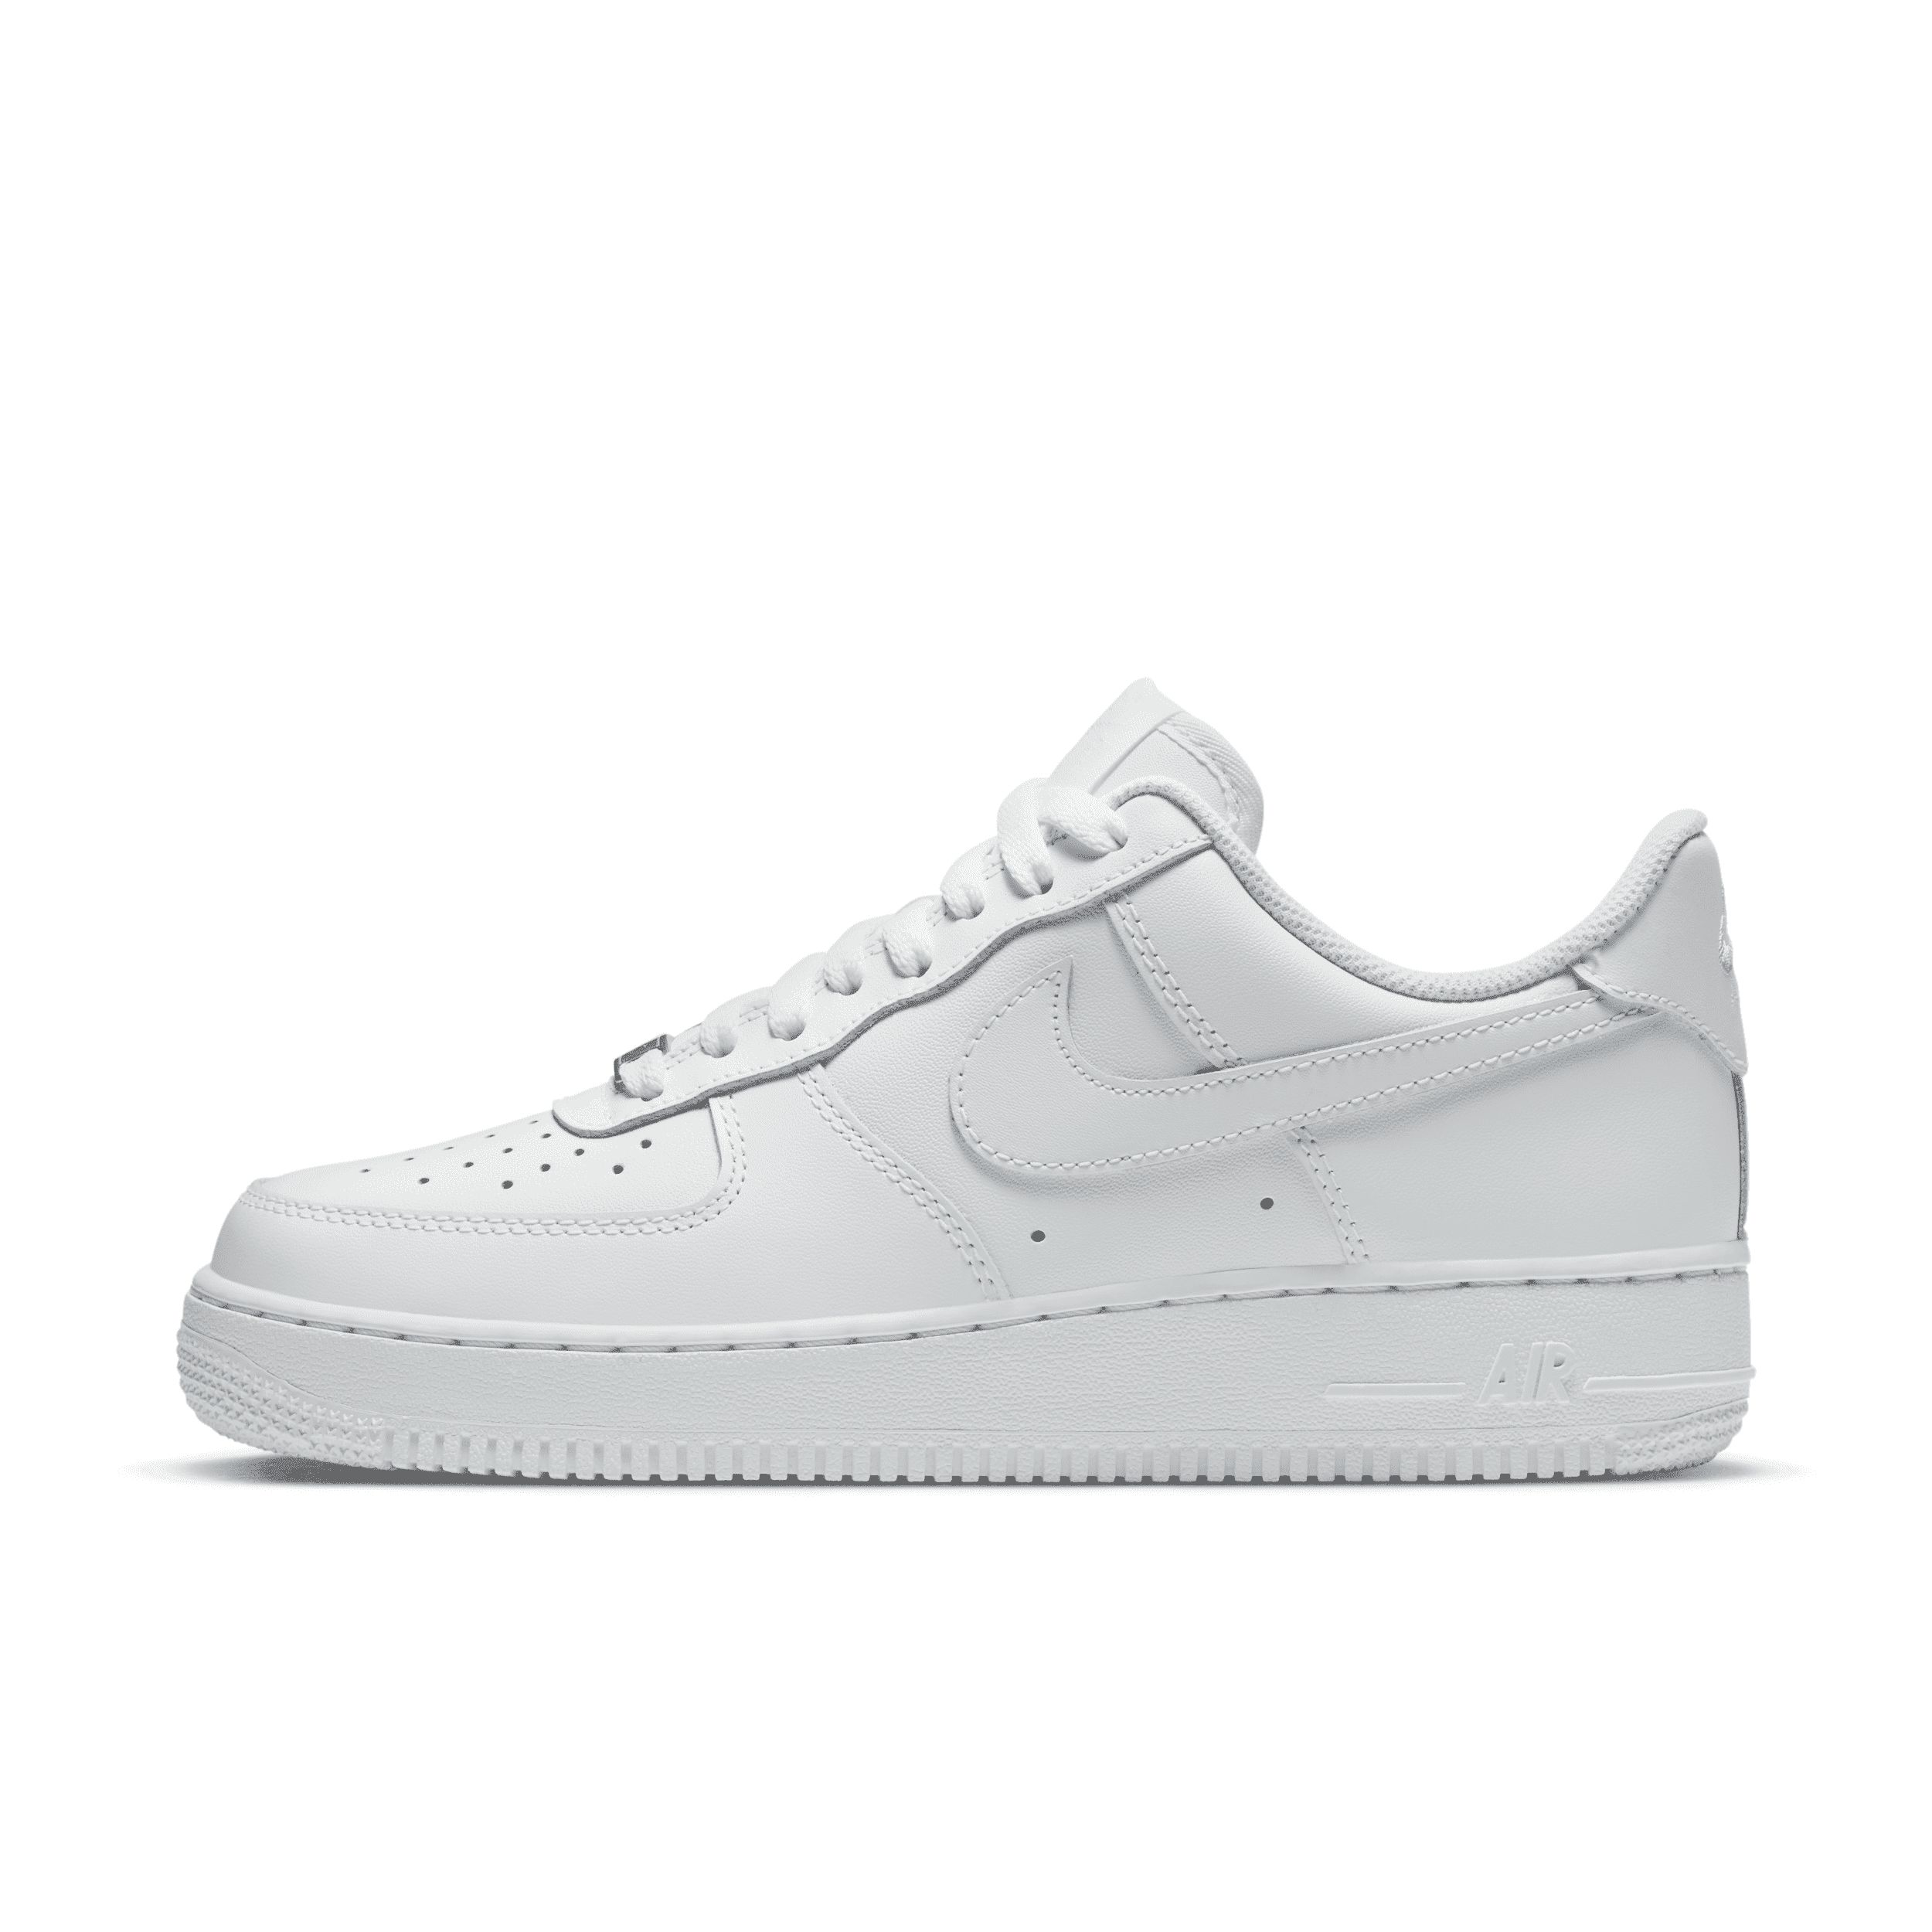 Nike Women's Air Force 1 '07 Shoes in White, Size: 6.5 | DD8959-100